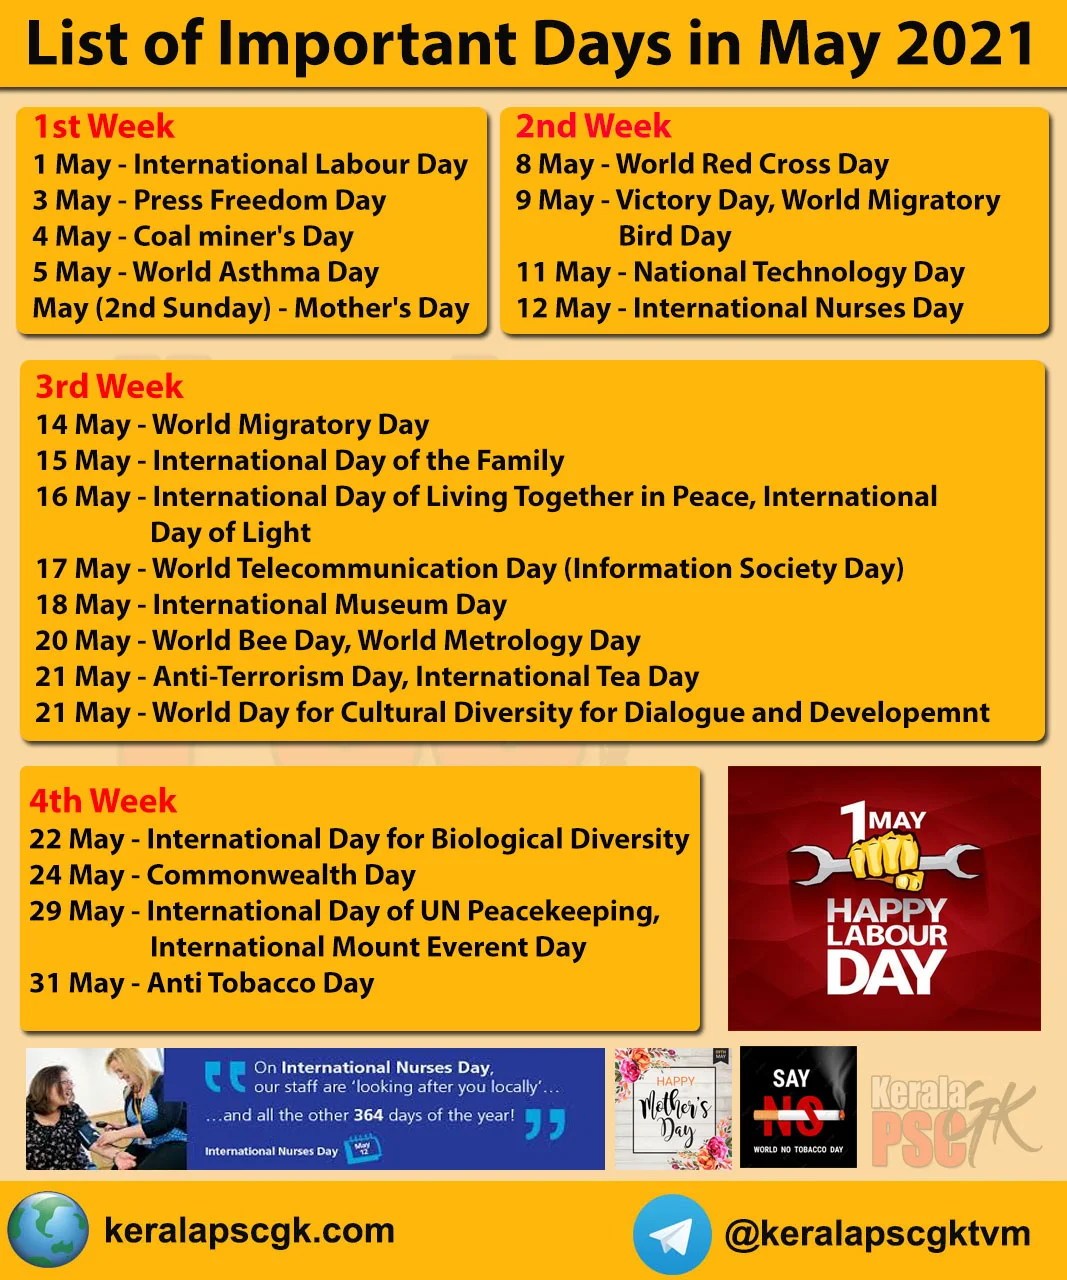 Kerala PSC GK - List of Important Days in May 2021